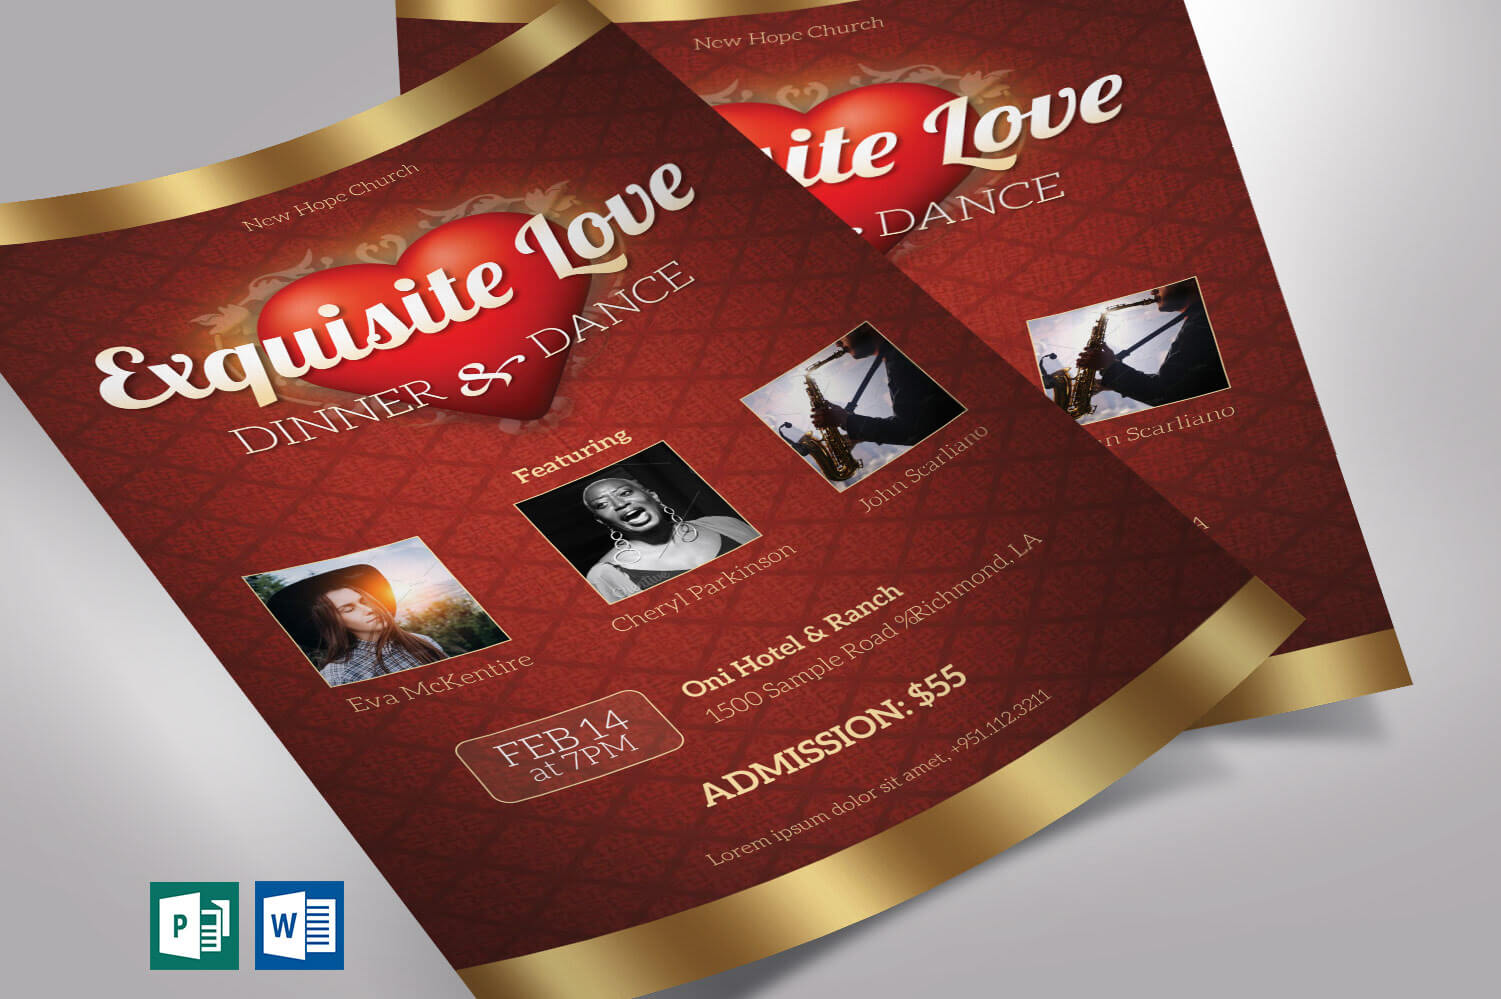 Valentines Dinner Dance Flyer Word Publisher Template On Behance Intended For Dance Flyer Template Word